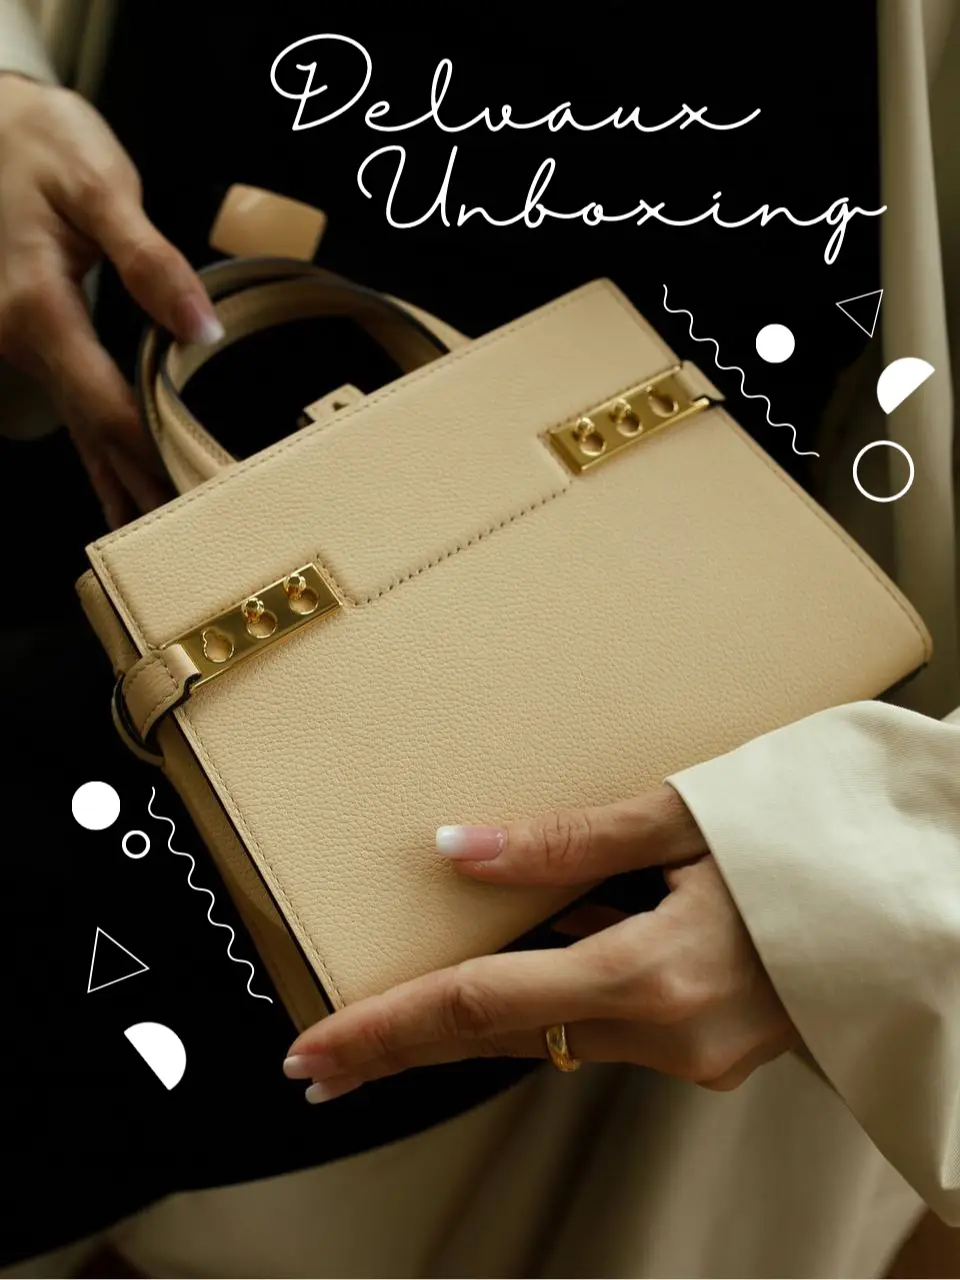 The TRUTH ABOUT DELVAUX  COME SHOPPING WITH ME AT DELVAUX IN